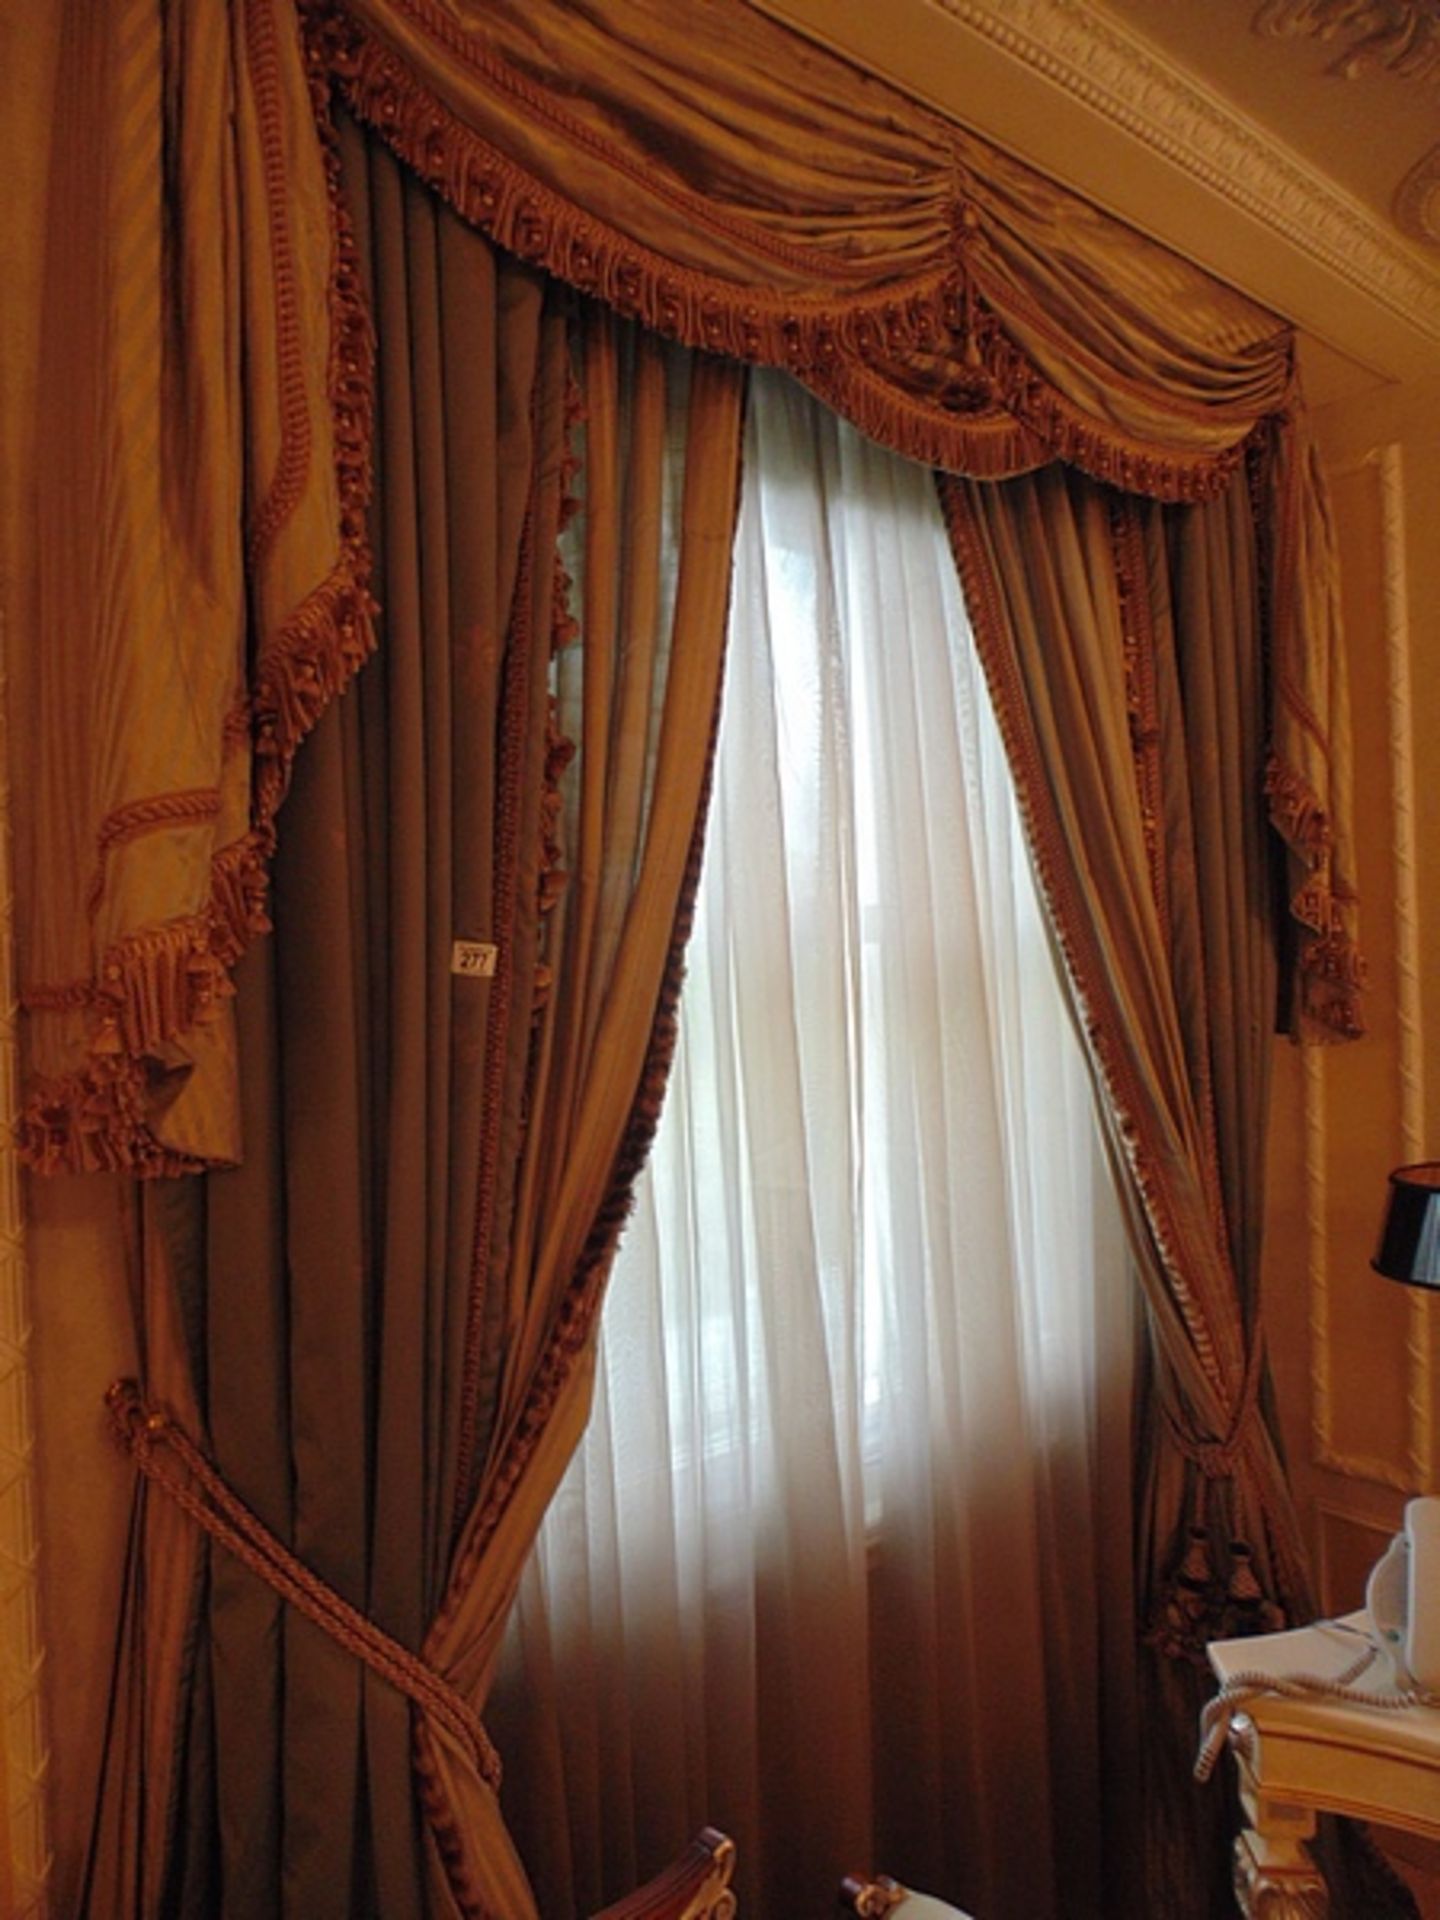 A pair of curtains supplied by Jacquard from Rudolph Ackermann`s A series design with elaborate